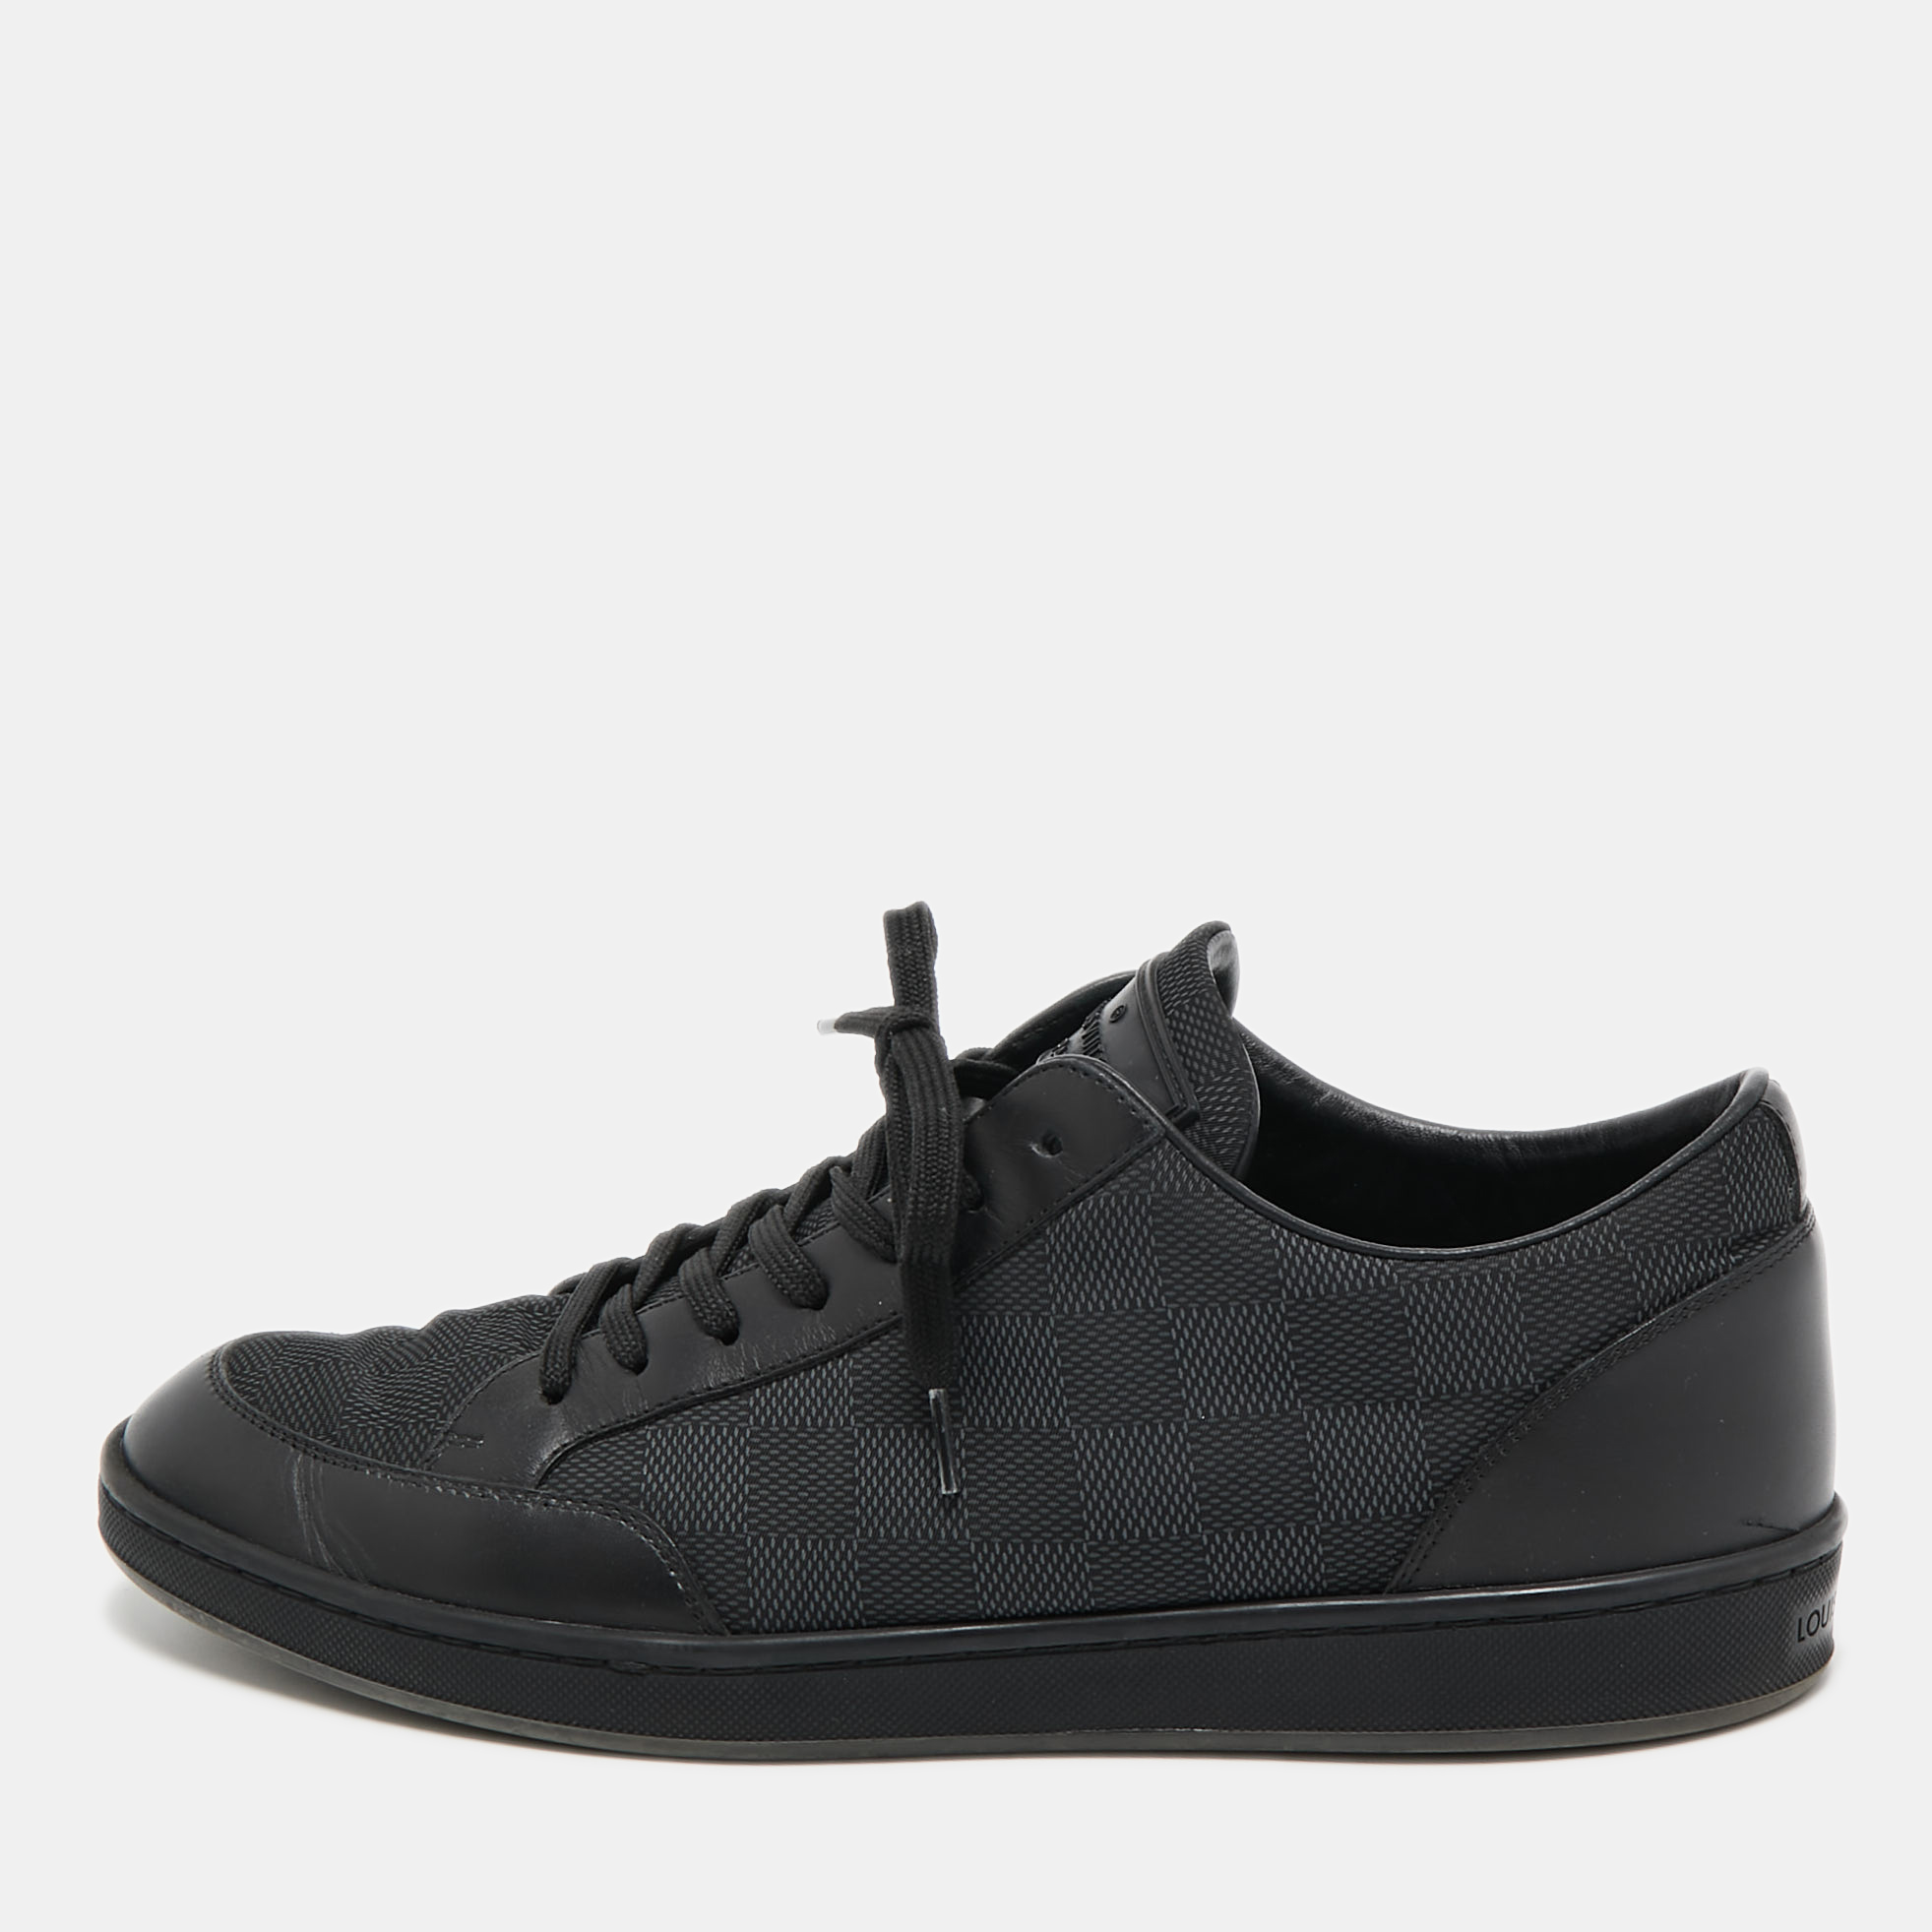 Louis vuitton black leather and nylon low top sneakers size 41